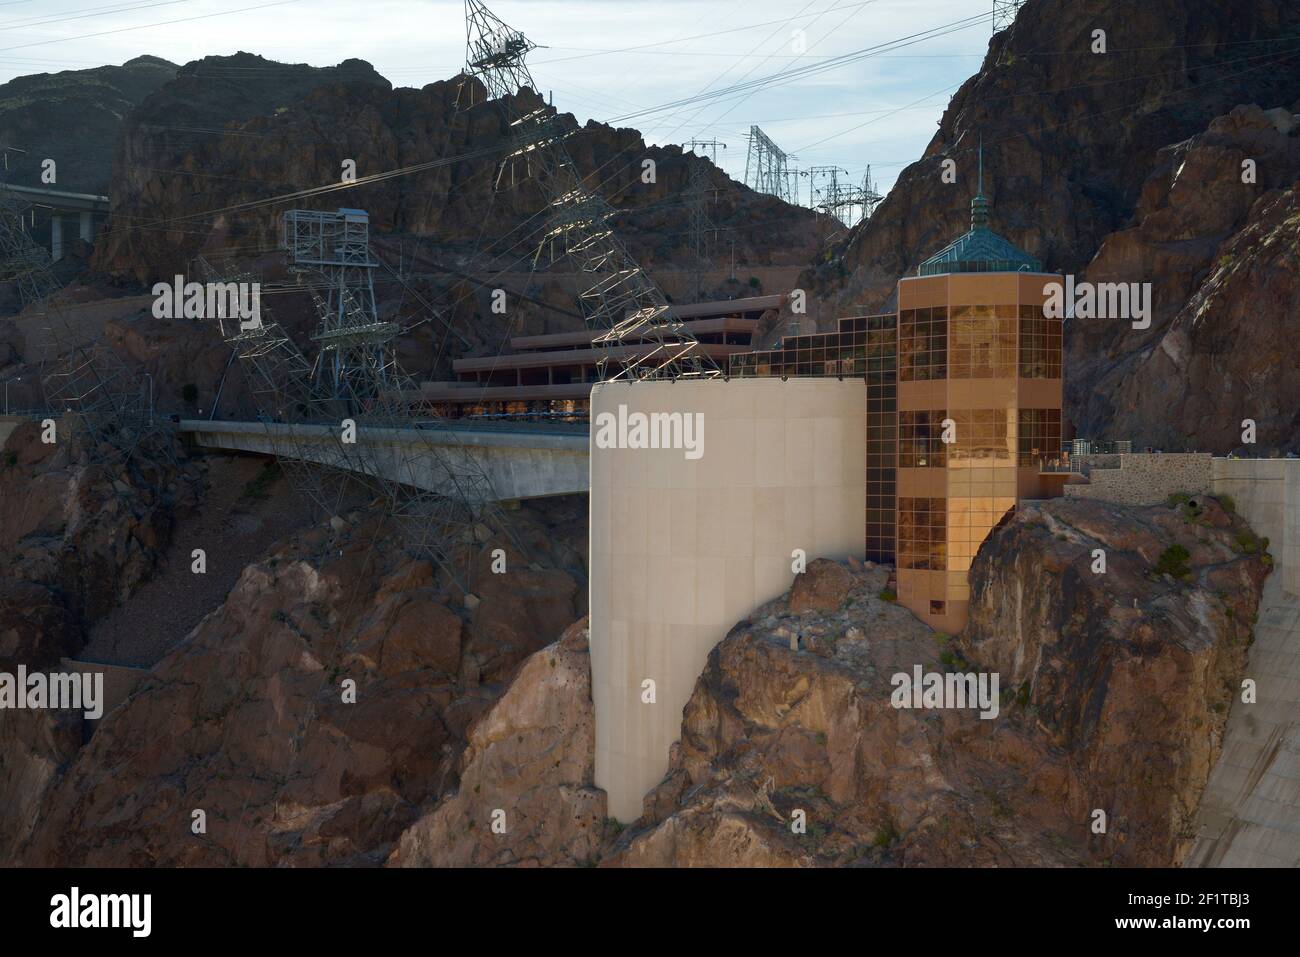 Visitors Center and power lines at Hoover Dam, Arizona, Nevada, USA Stock Photo